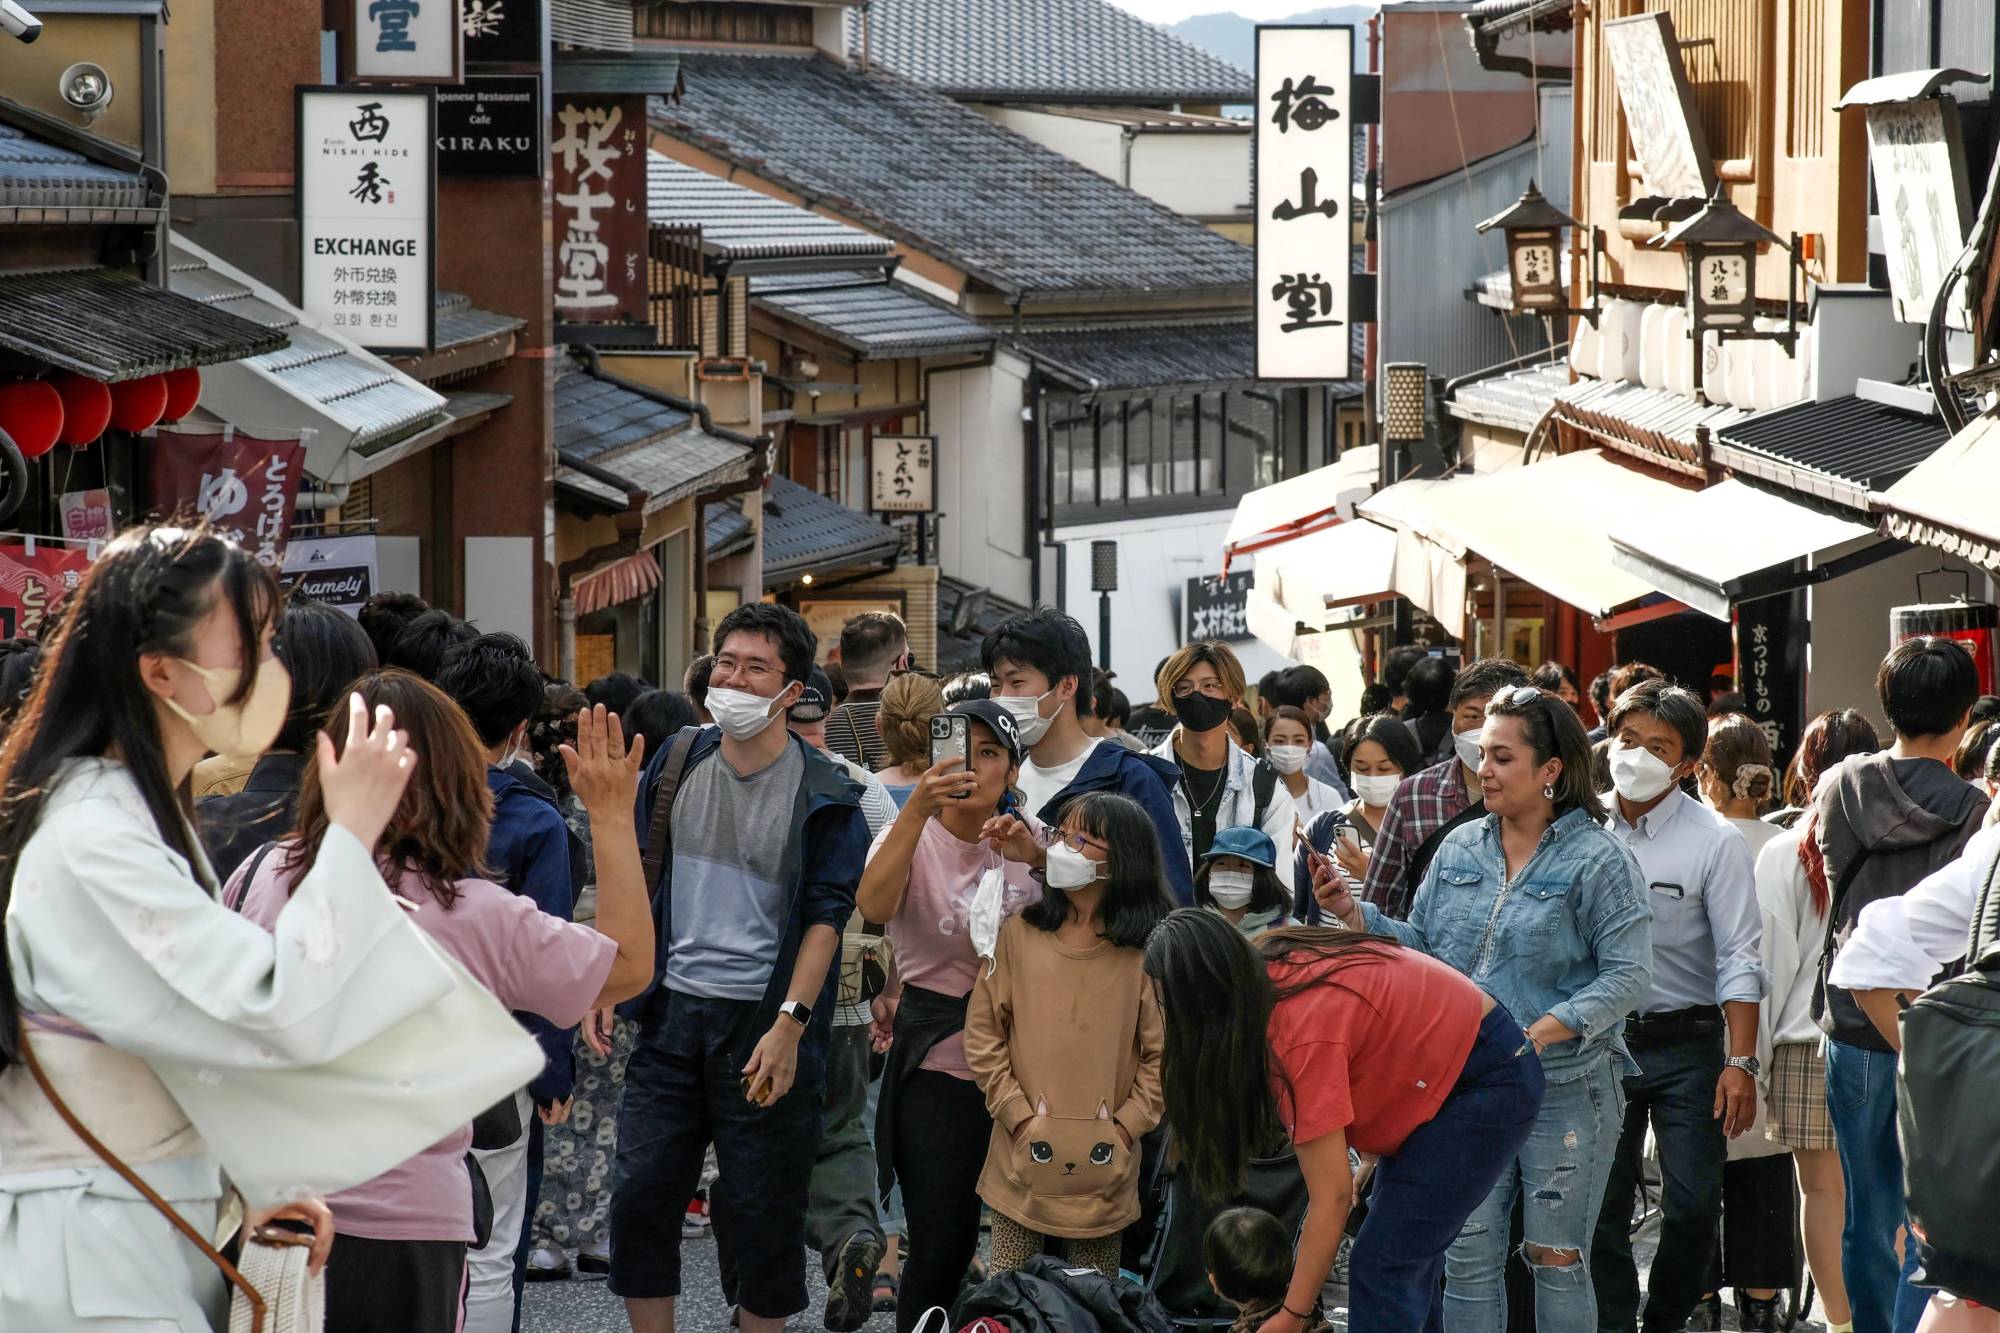 Tourists in Kyoto on Tuesday. The domestic travel discount program is causing confusion among travelers and tourist agencies. | KYODO